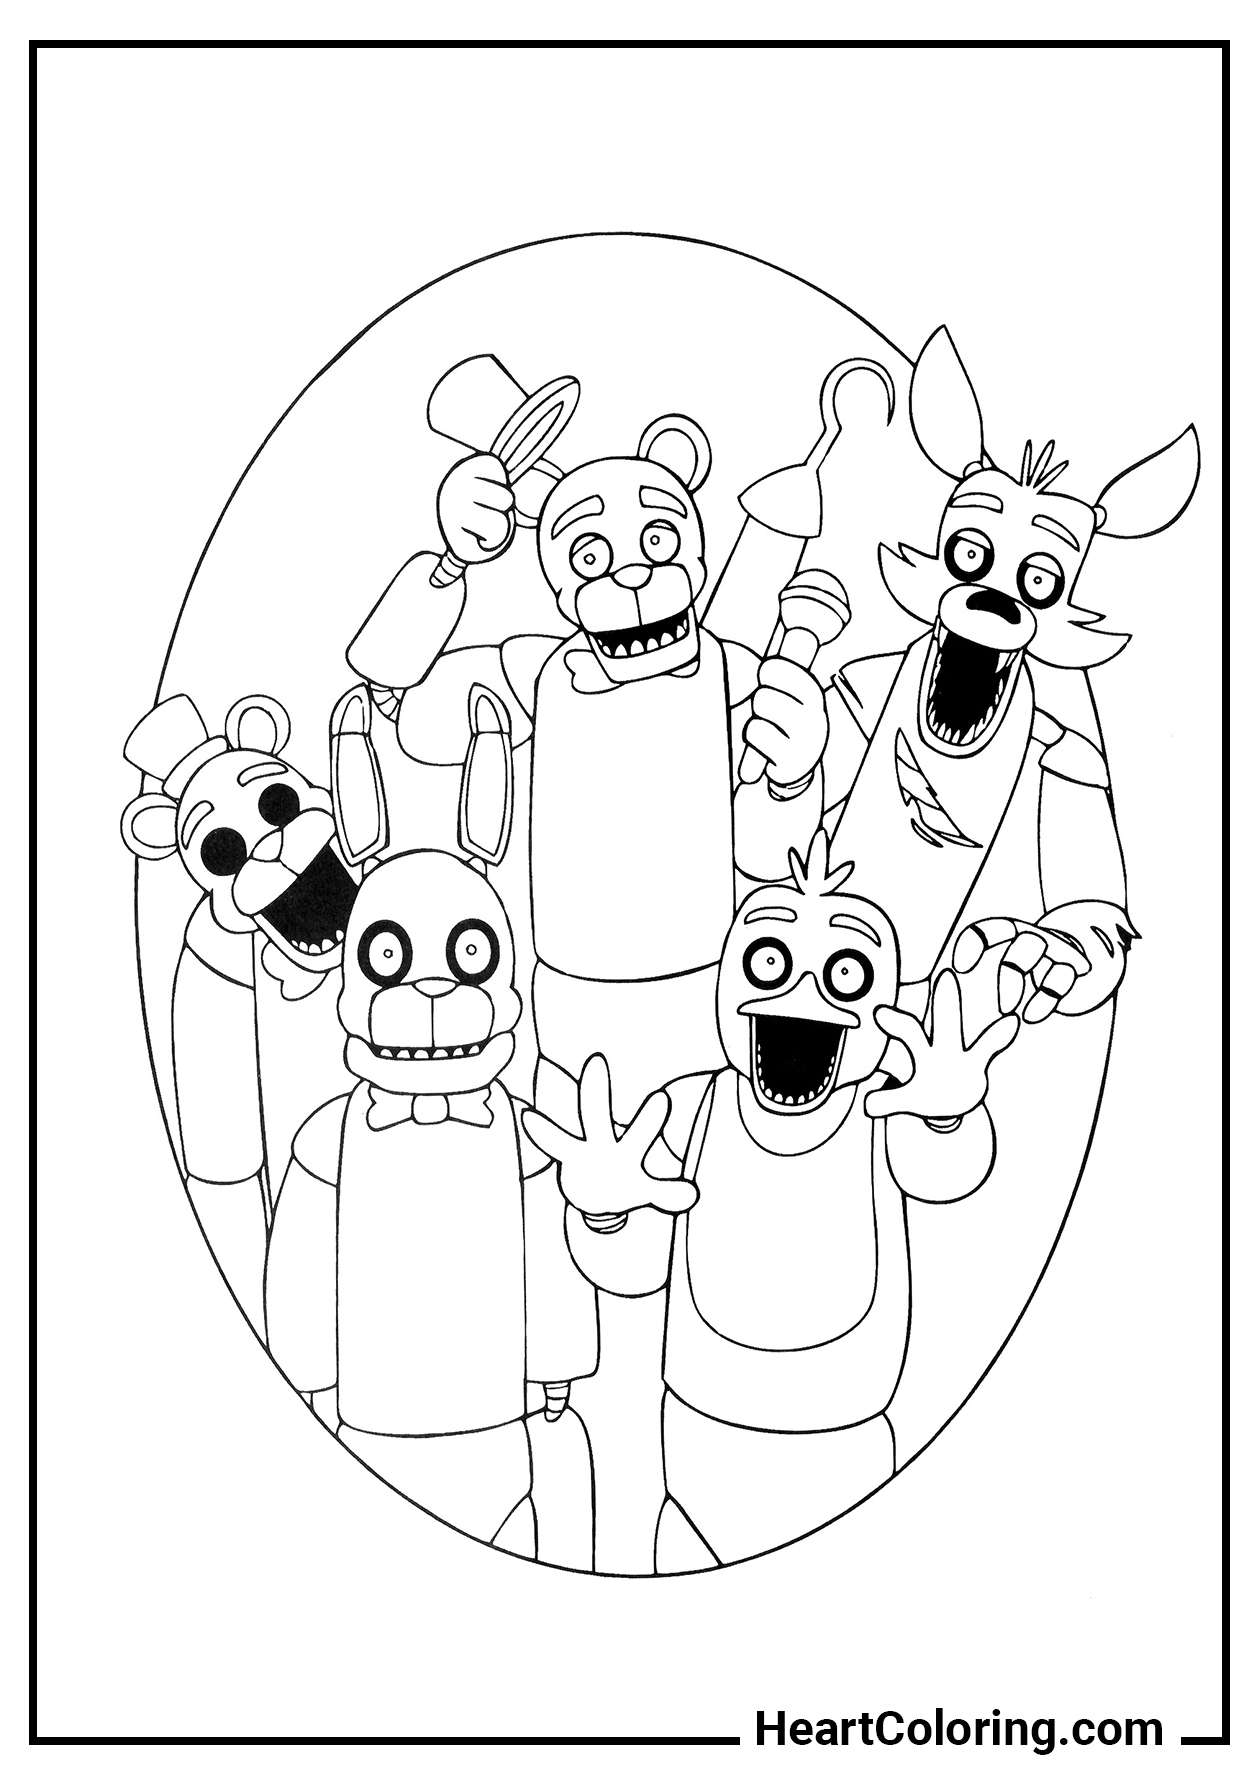 Five Nights at Freddy's Coloring Pages ...